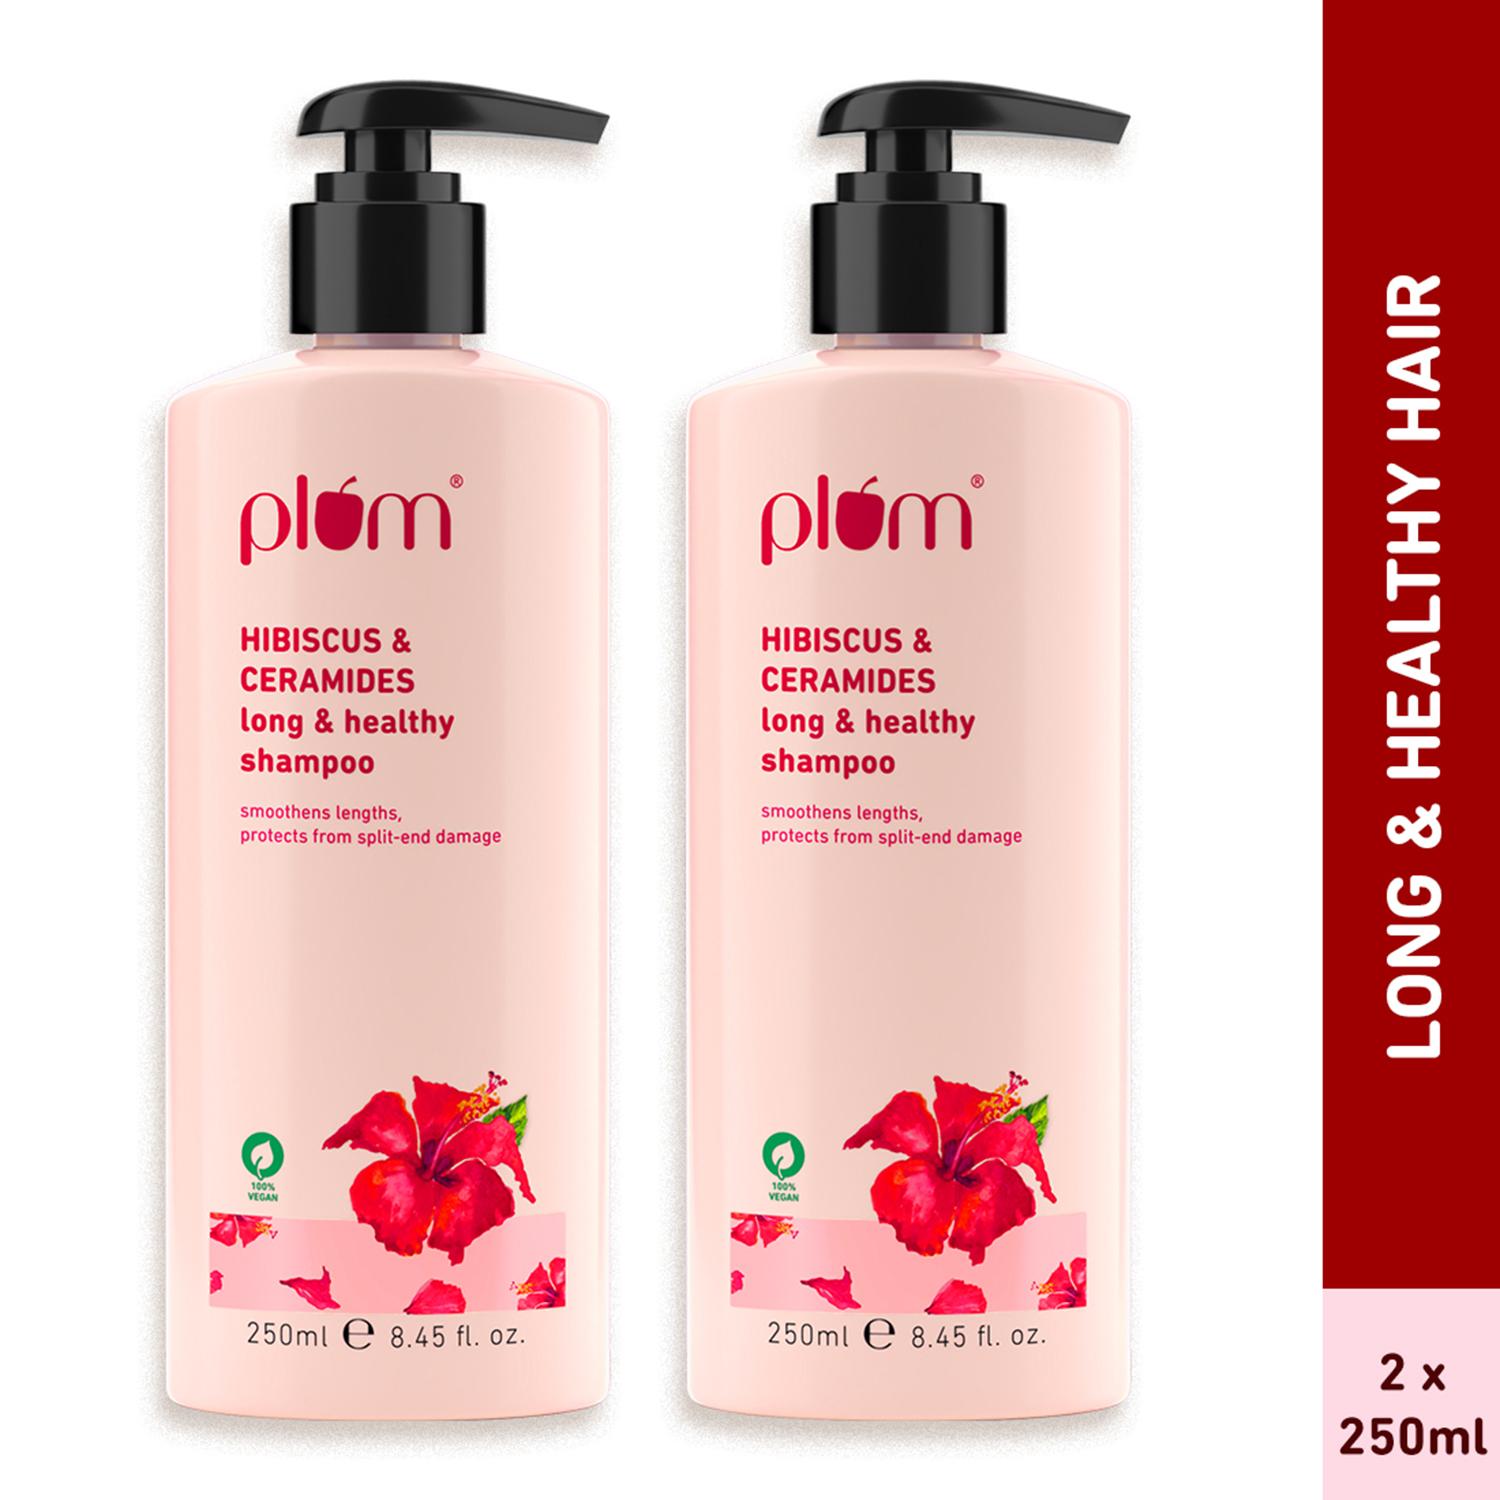 Plum Hibiscus & Ceramides Long & Healthy Shampoo (250 ml) Pack of 2 Combo